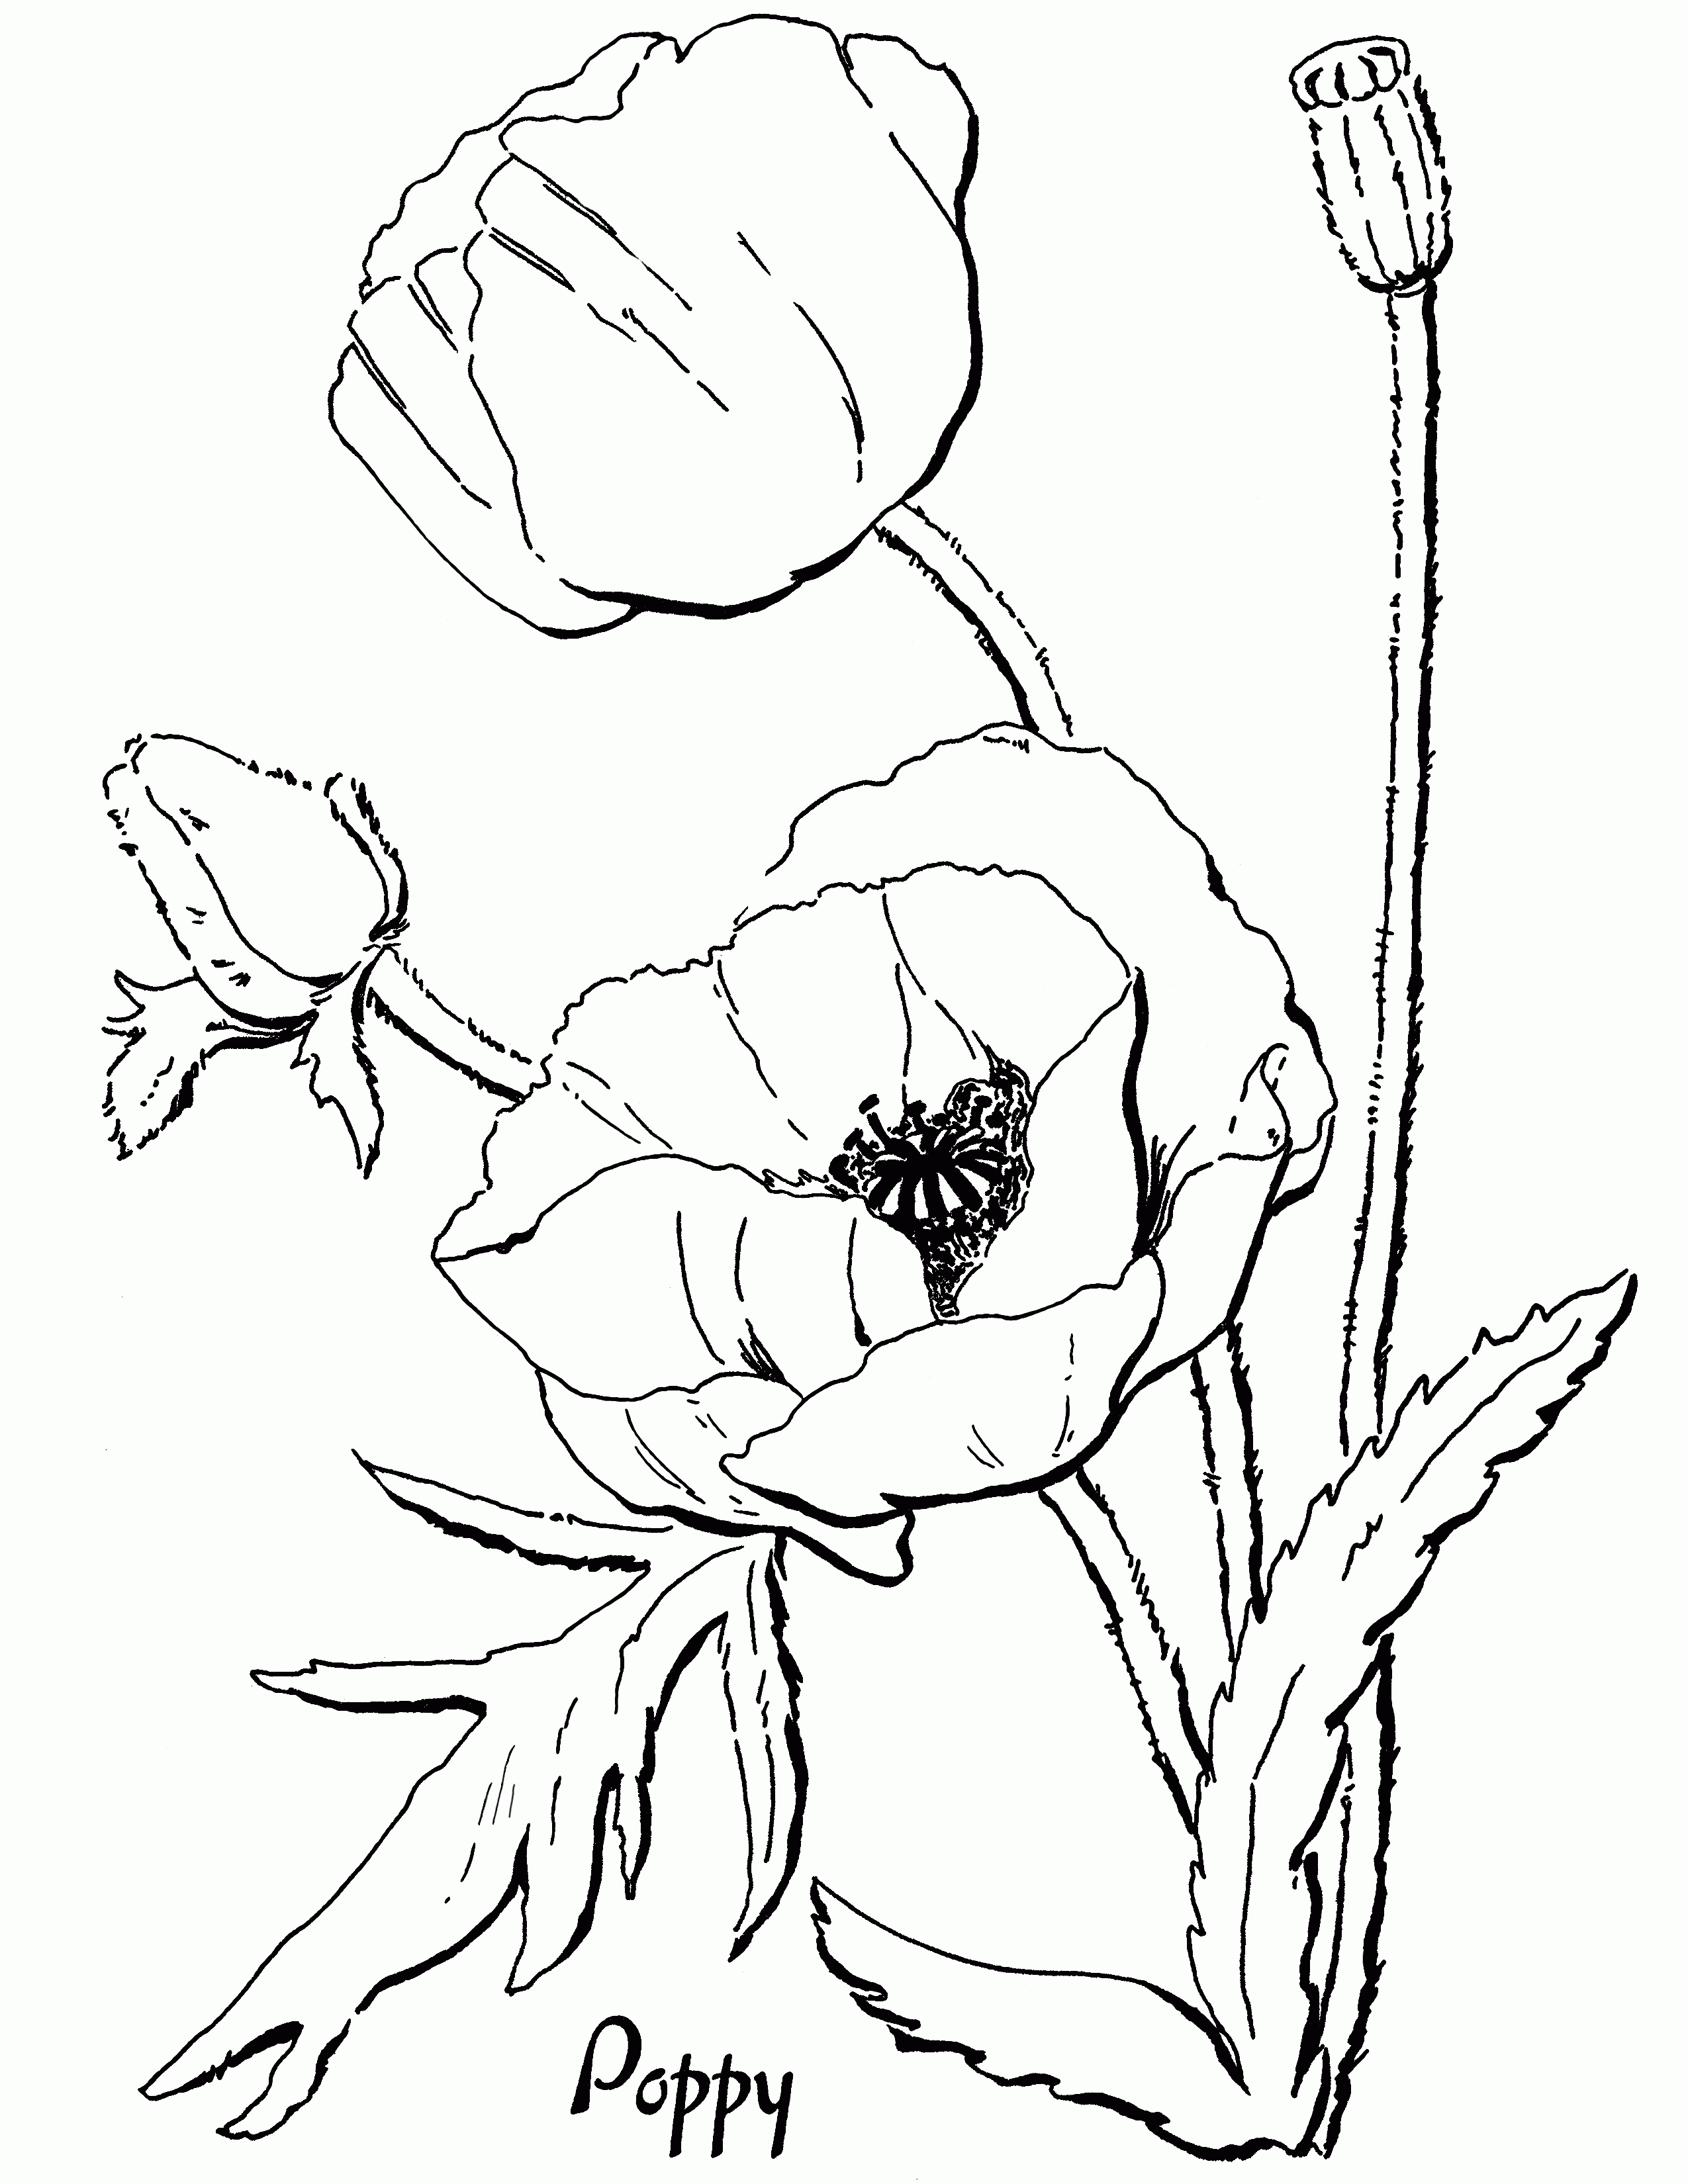 Poppy Coloring Pages For Kids   Coloring Home